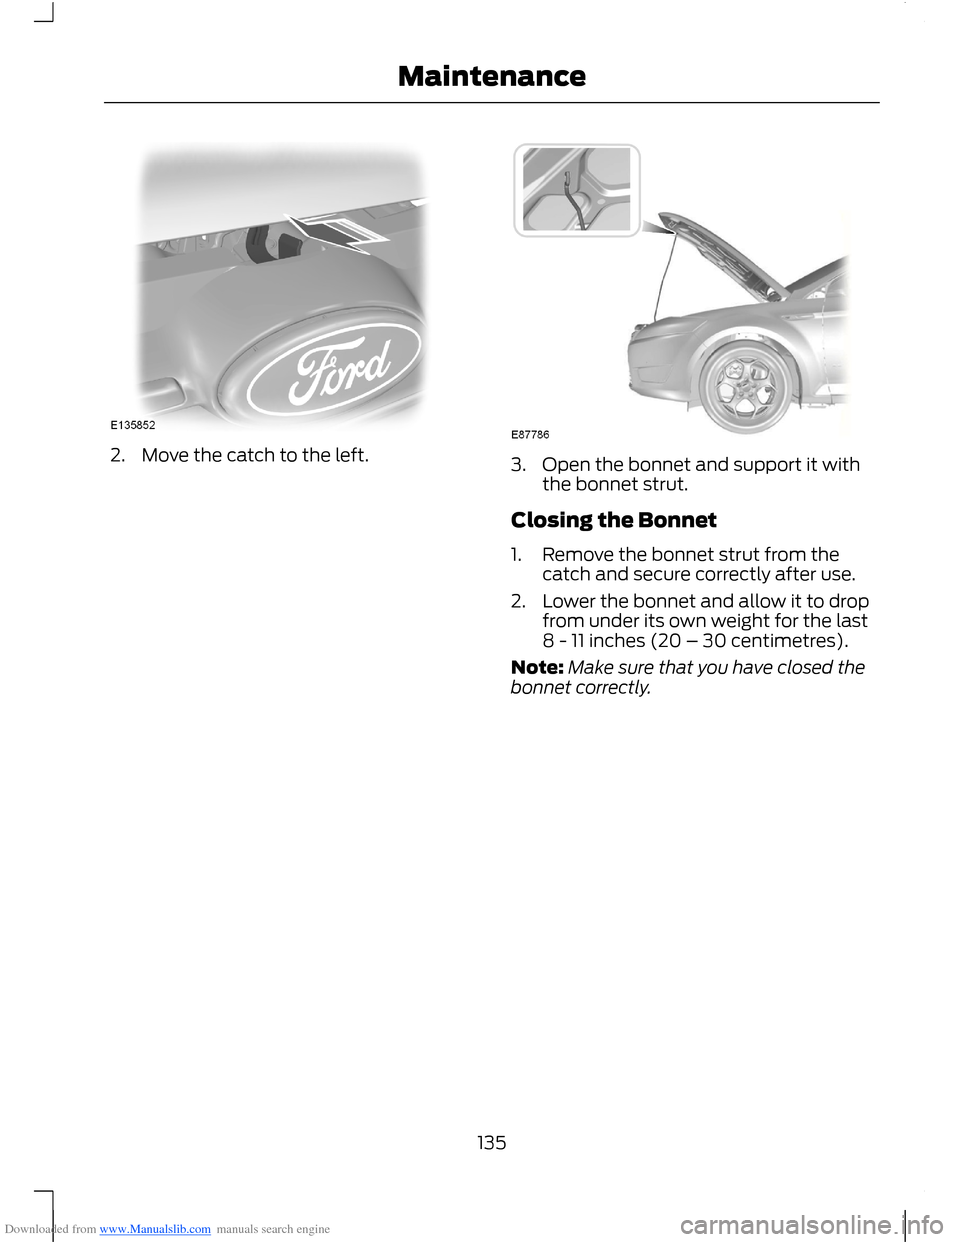 FORD B MAX 2012 1.G Owners Manual Downloaded from www.Manualslib.com manuals search engine 2.Move the catch to the left.3.Open the bonnet and support it withthe bonnet strut.
Closing the Bonnet
1.Remove the bonnet strut from thecatch 